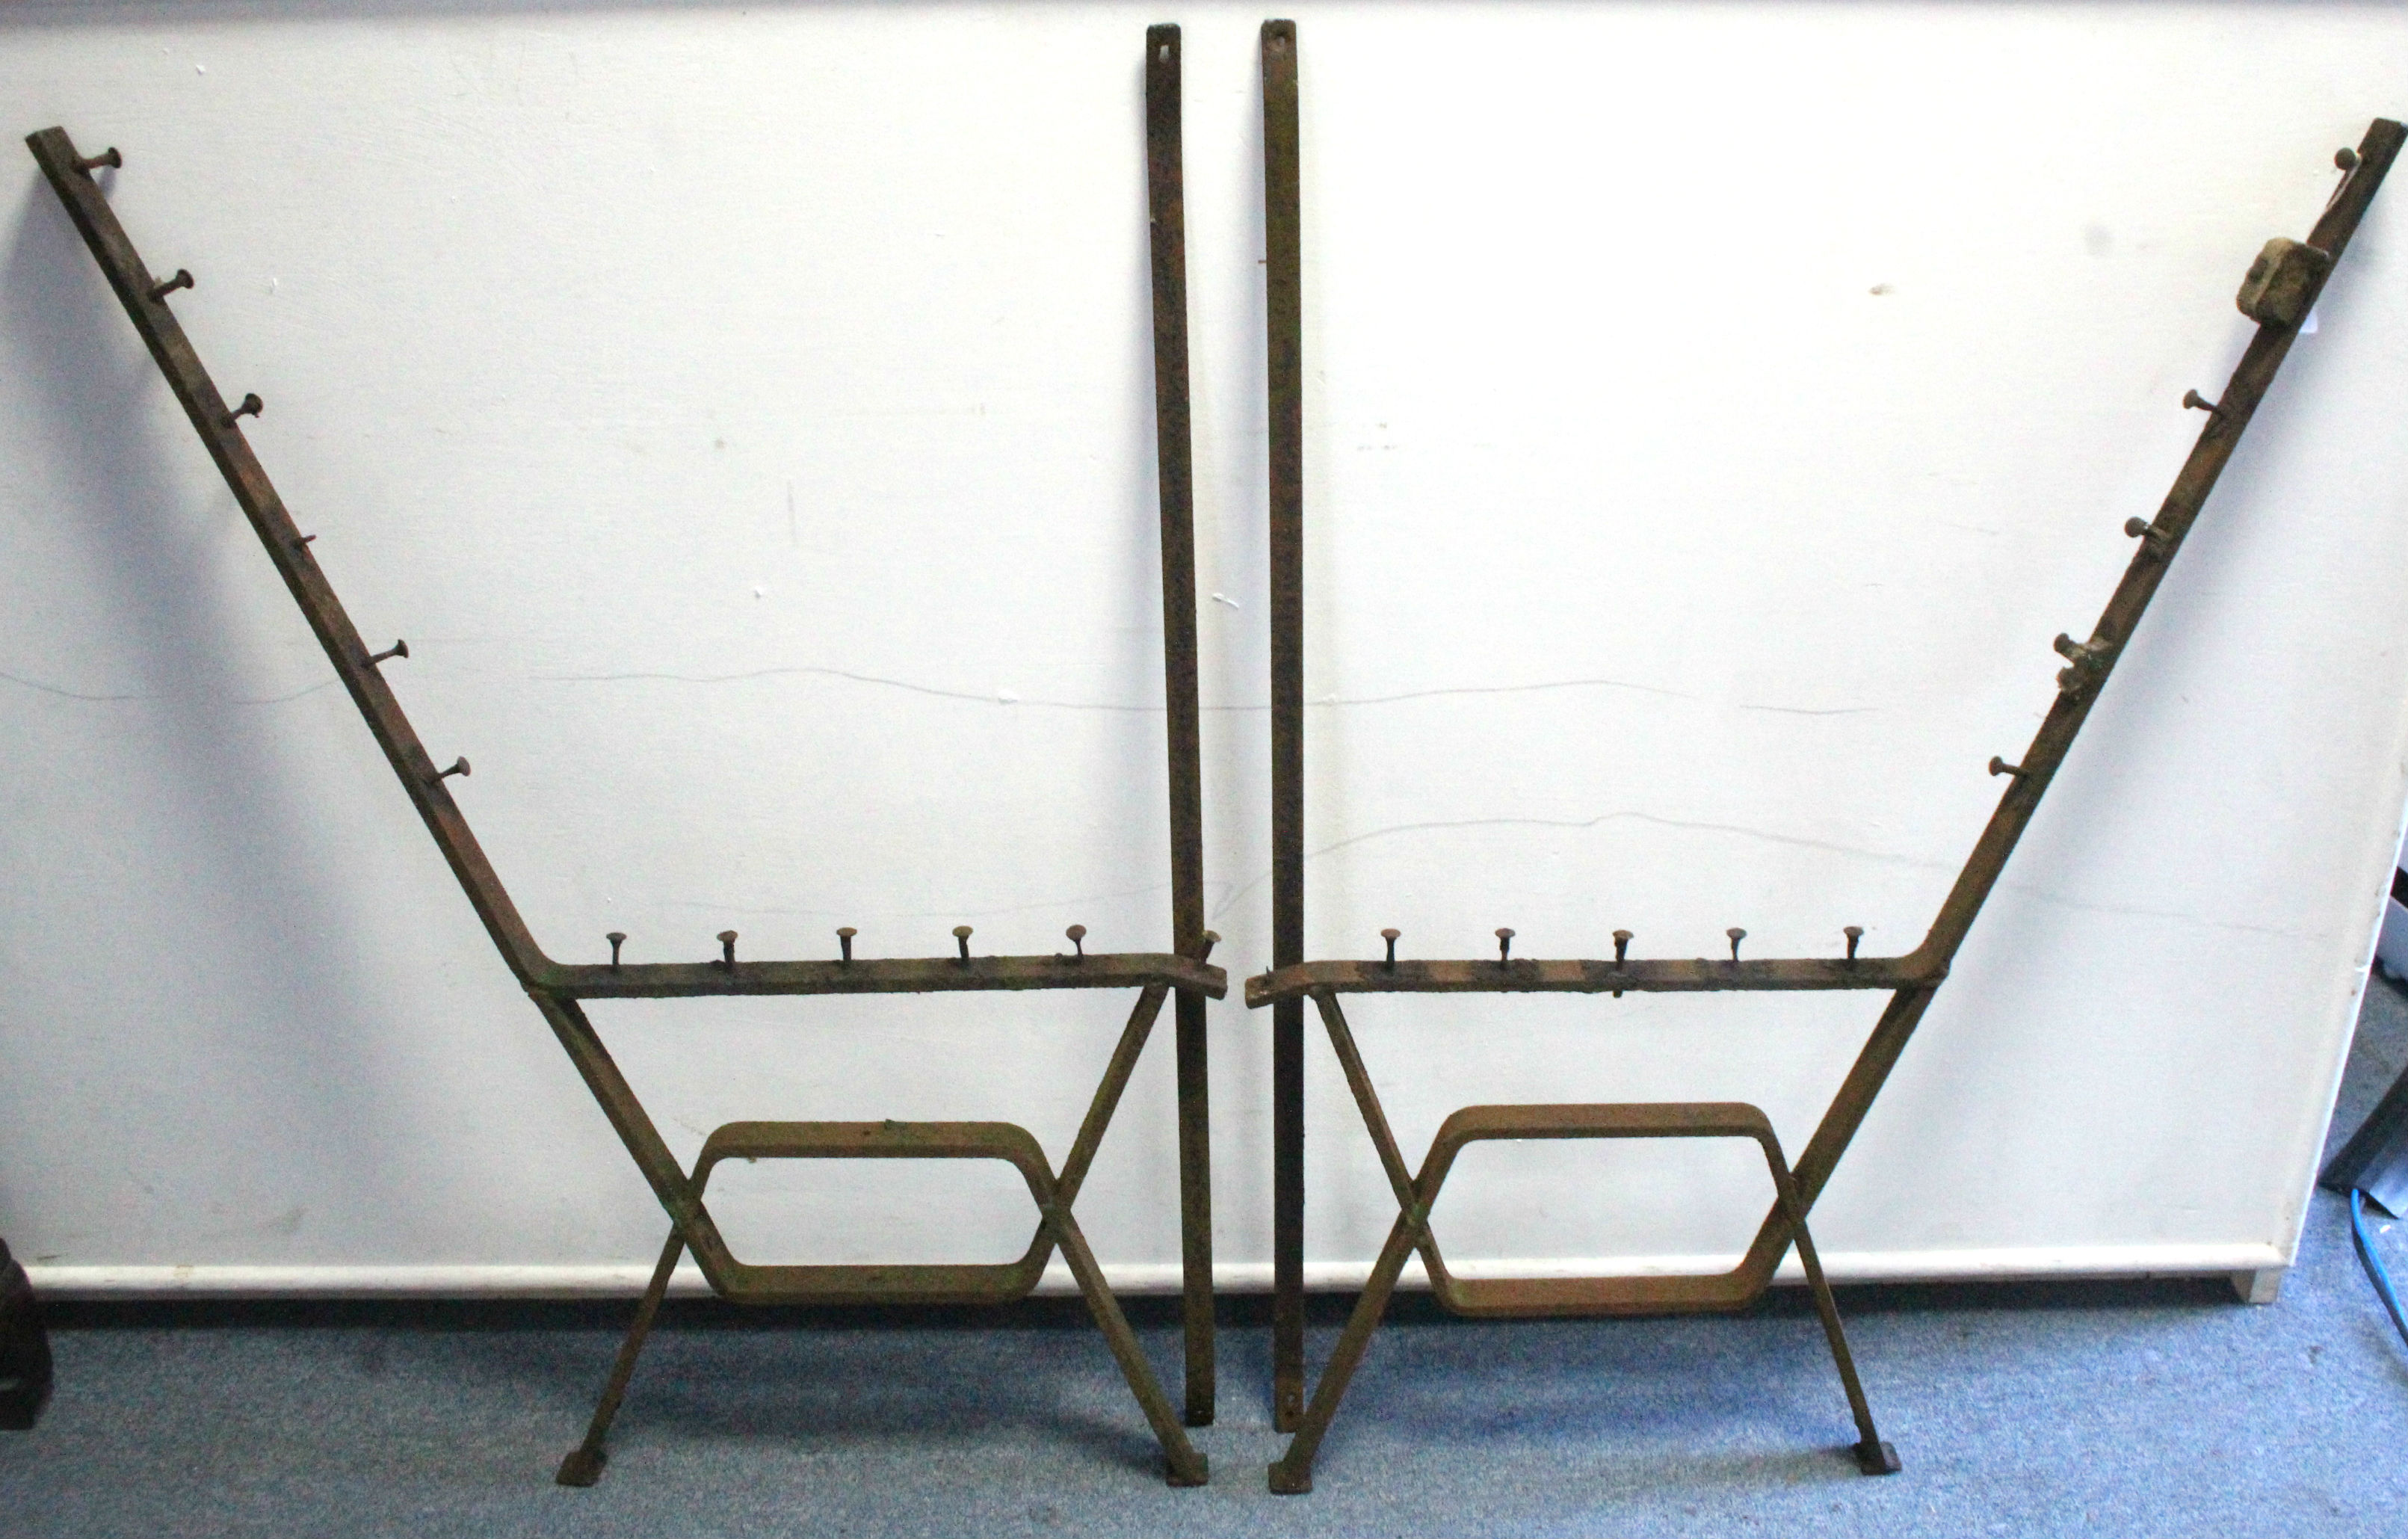 A set of three cast-iron garden bench supports, 38” high. - Image 2 of 2